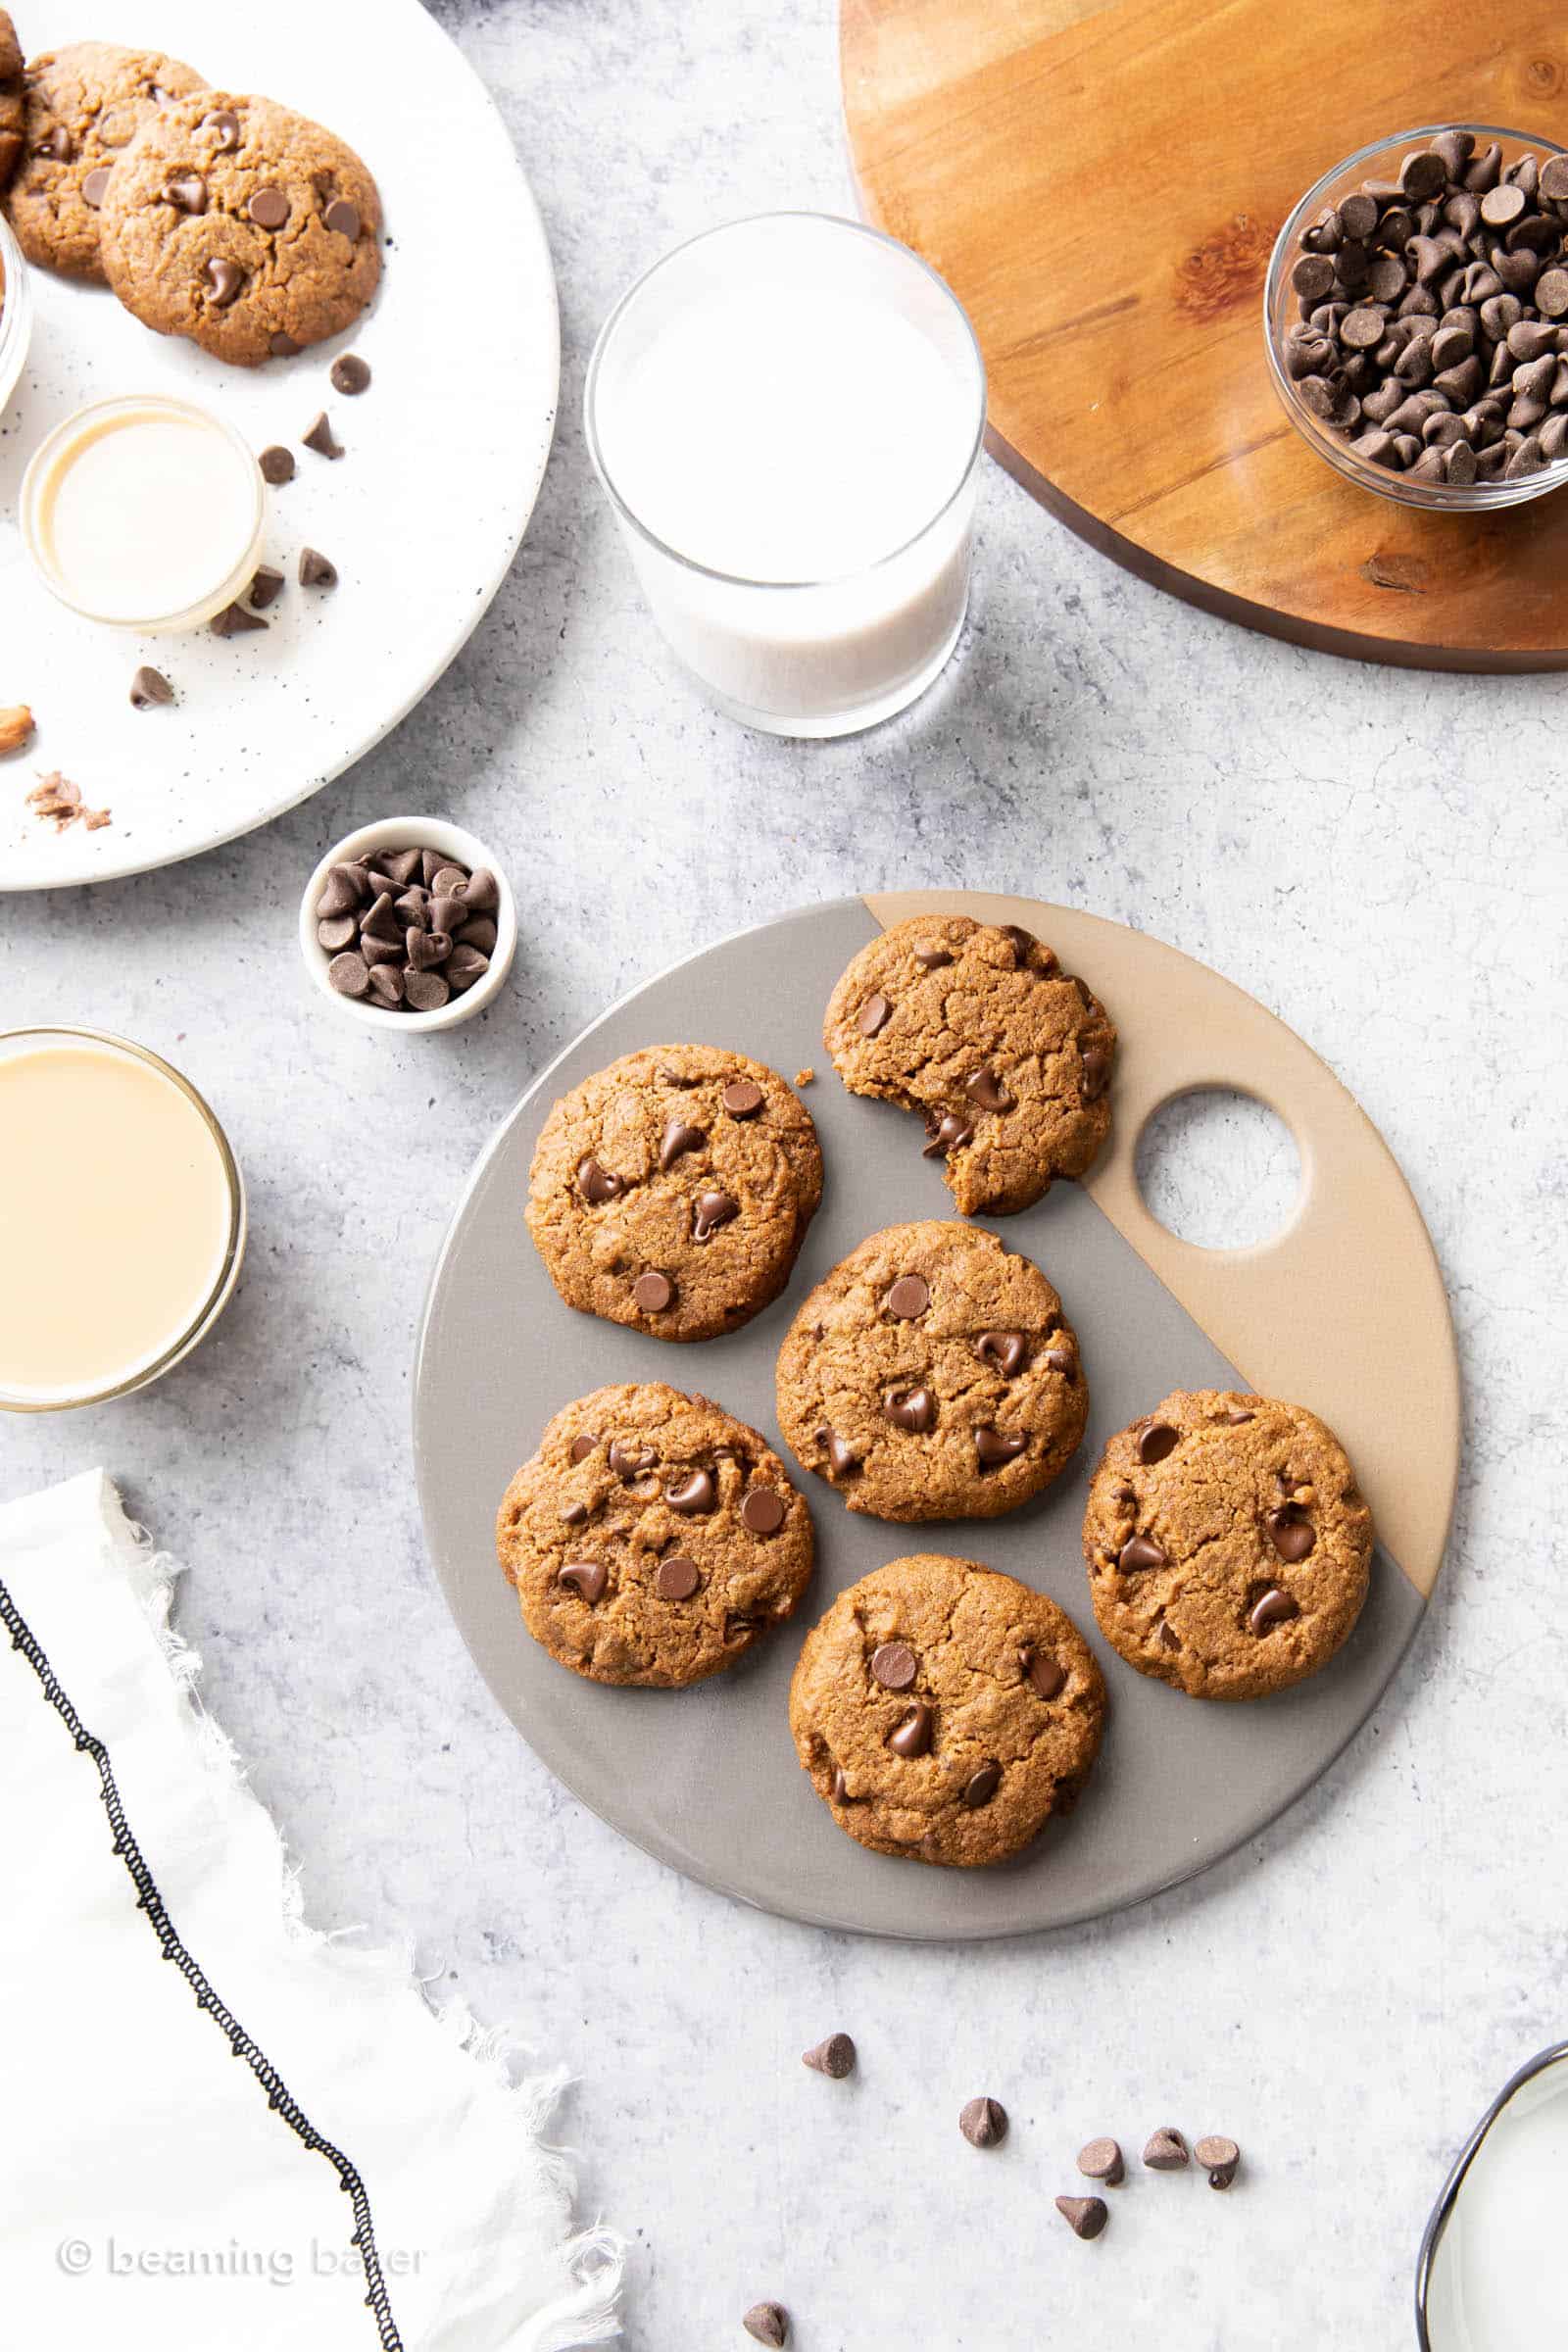 Circular serving board with tahini cookies, a glass of milk, a bowl of chocolate chips, and tahini